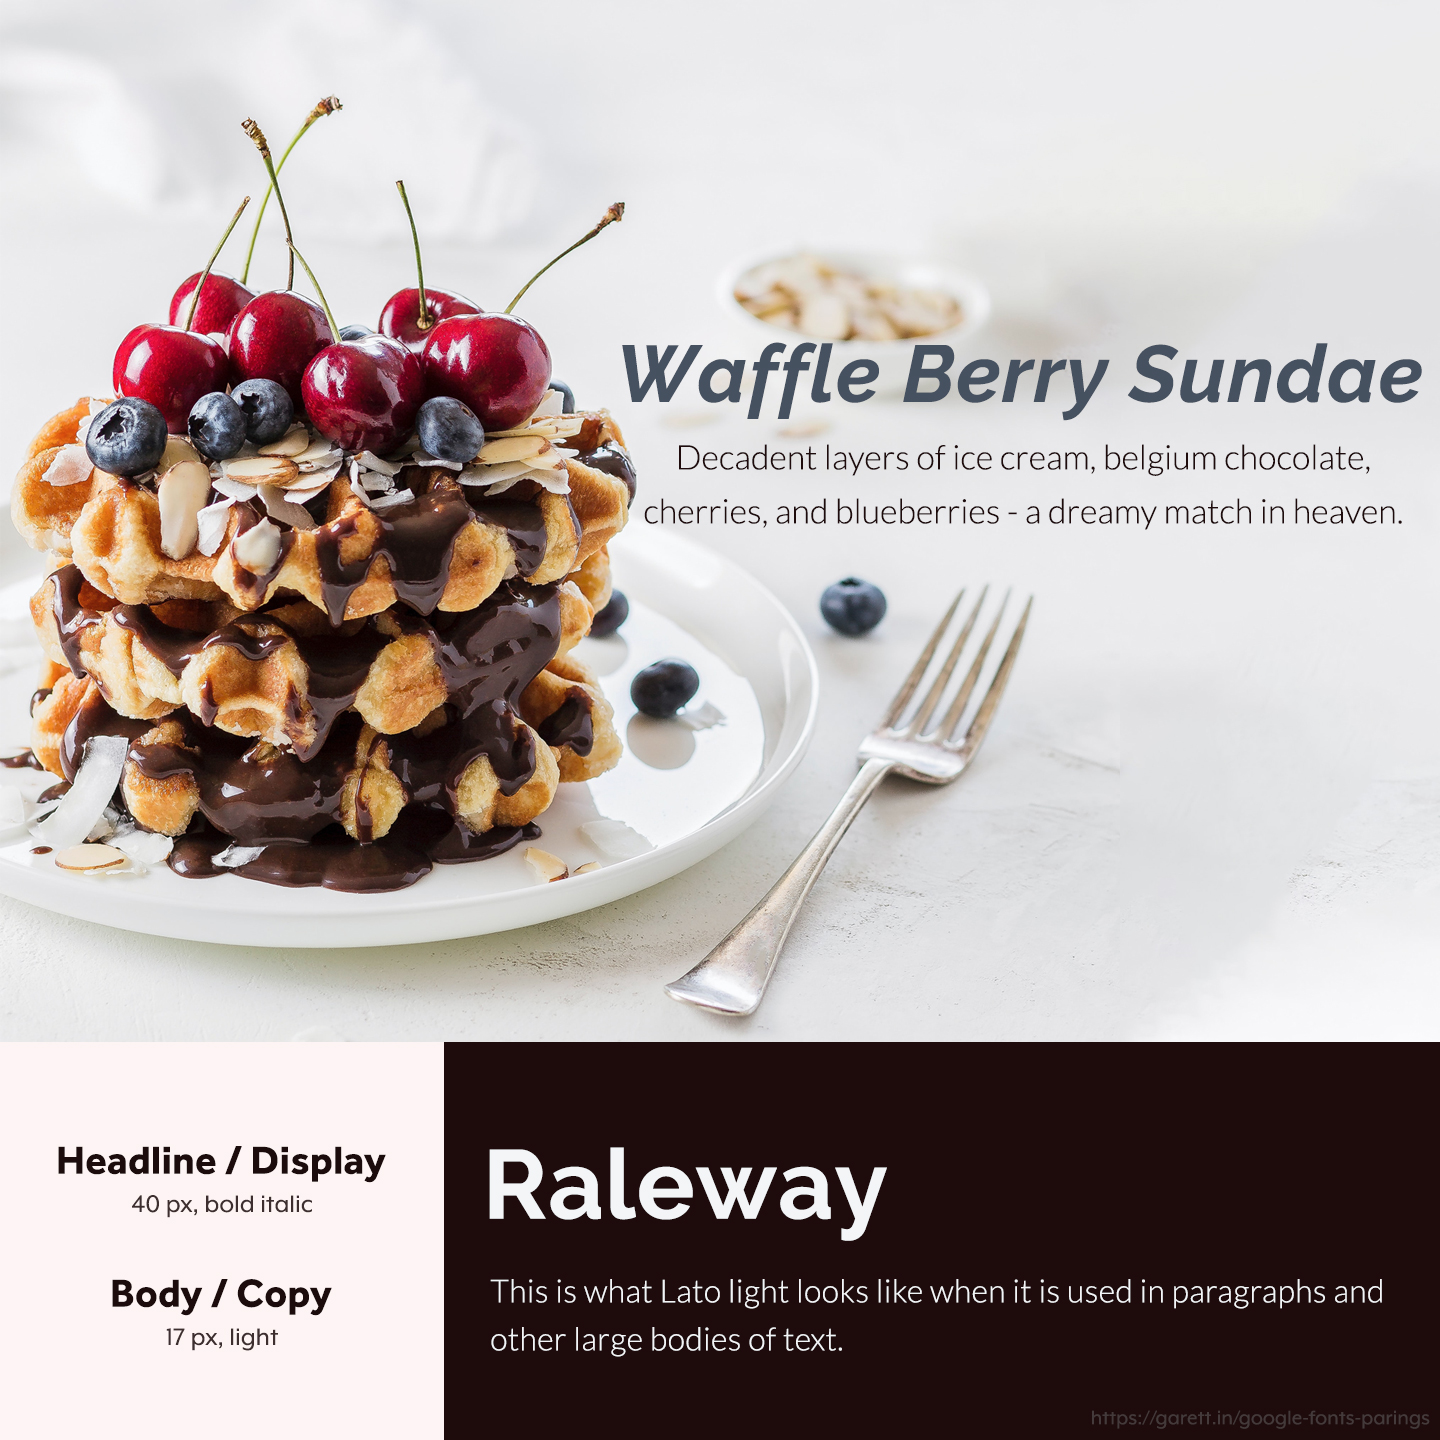 Raleway and Lato font pairing - 30 Google Font Pairings for Your Brand and Website